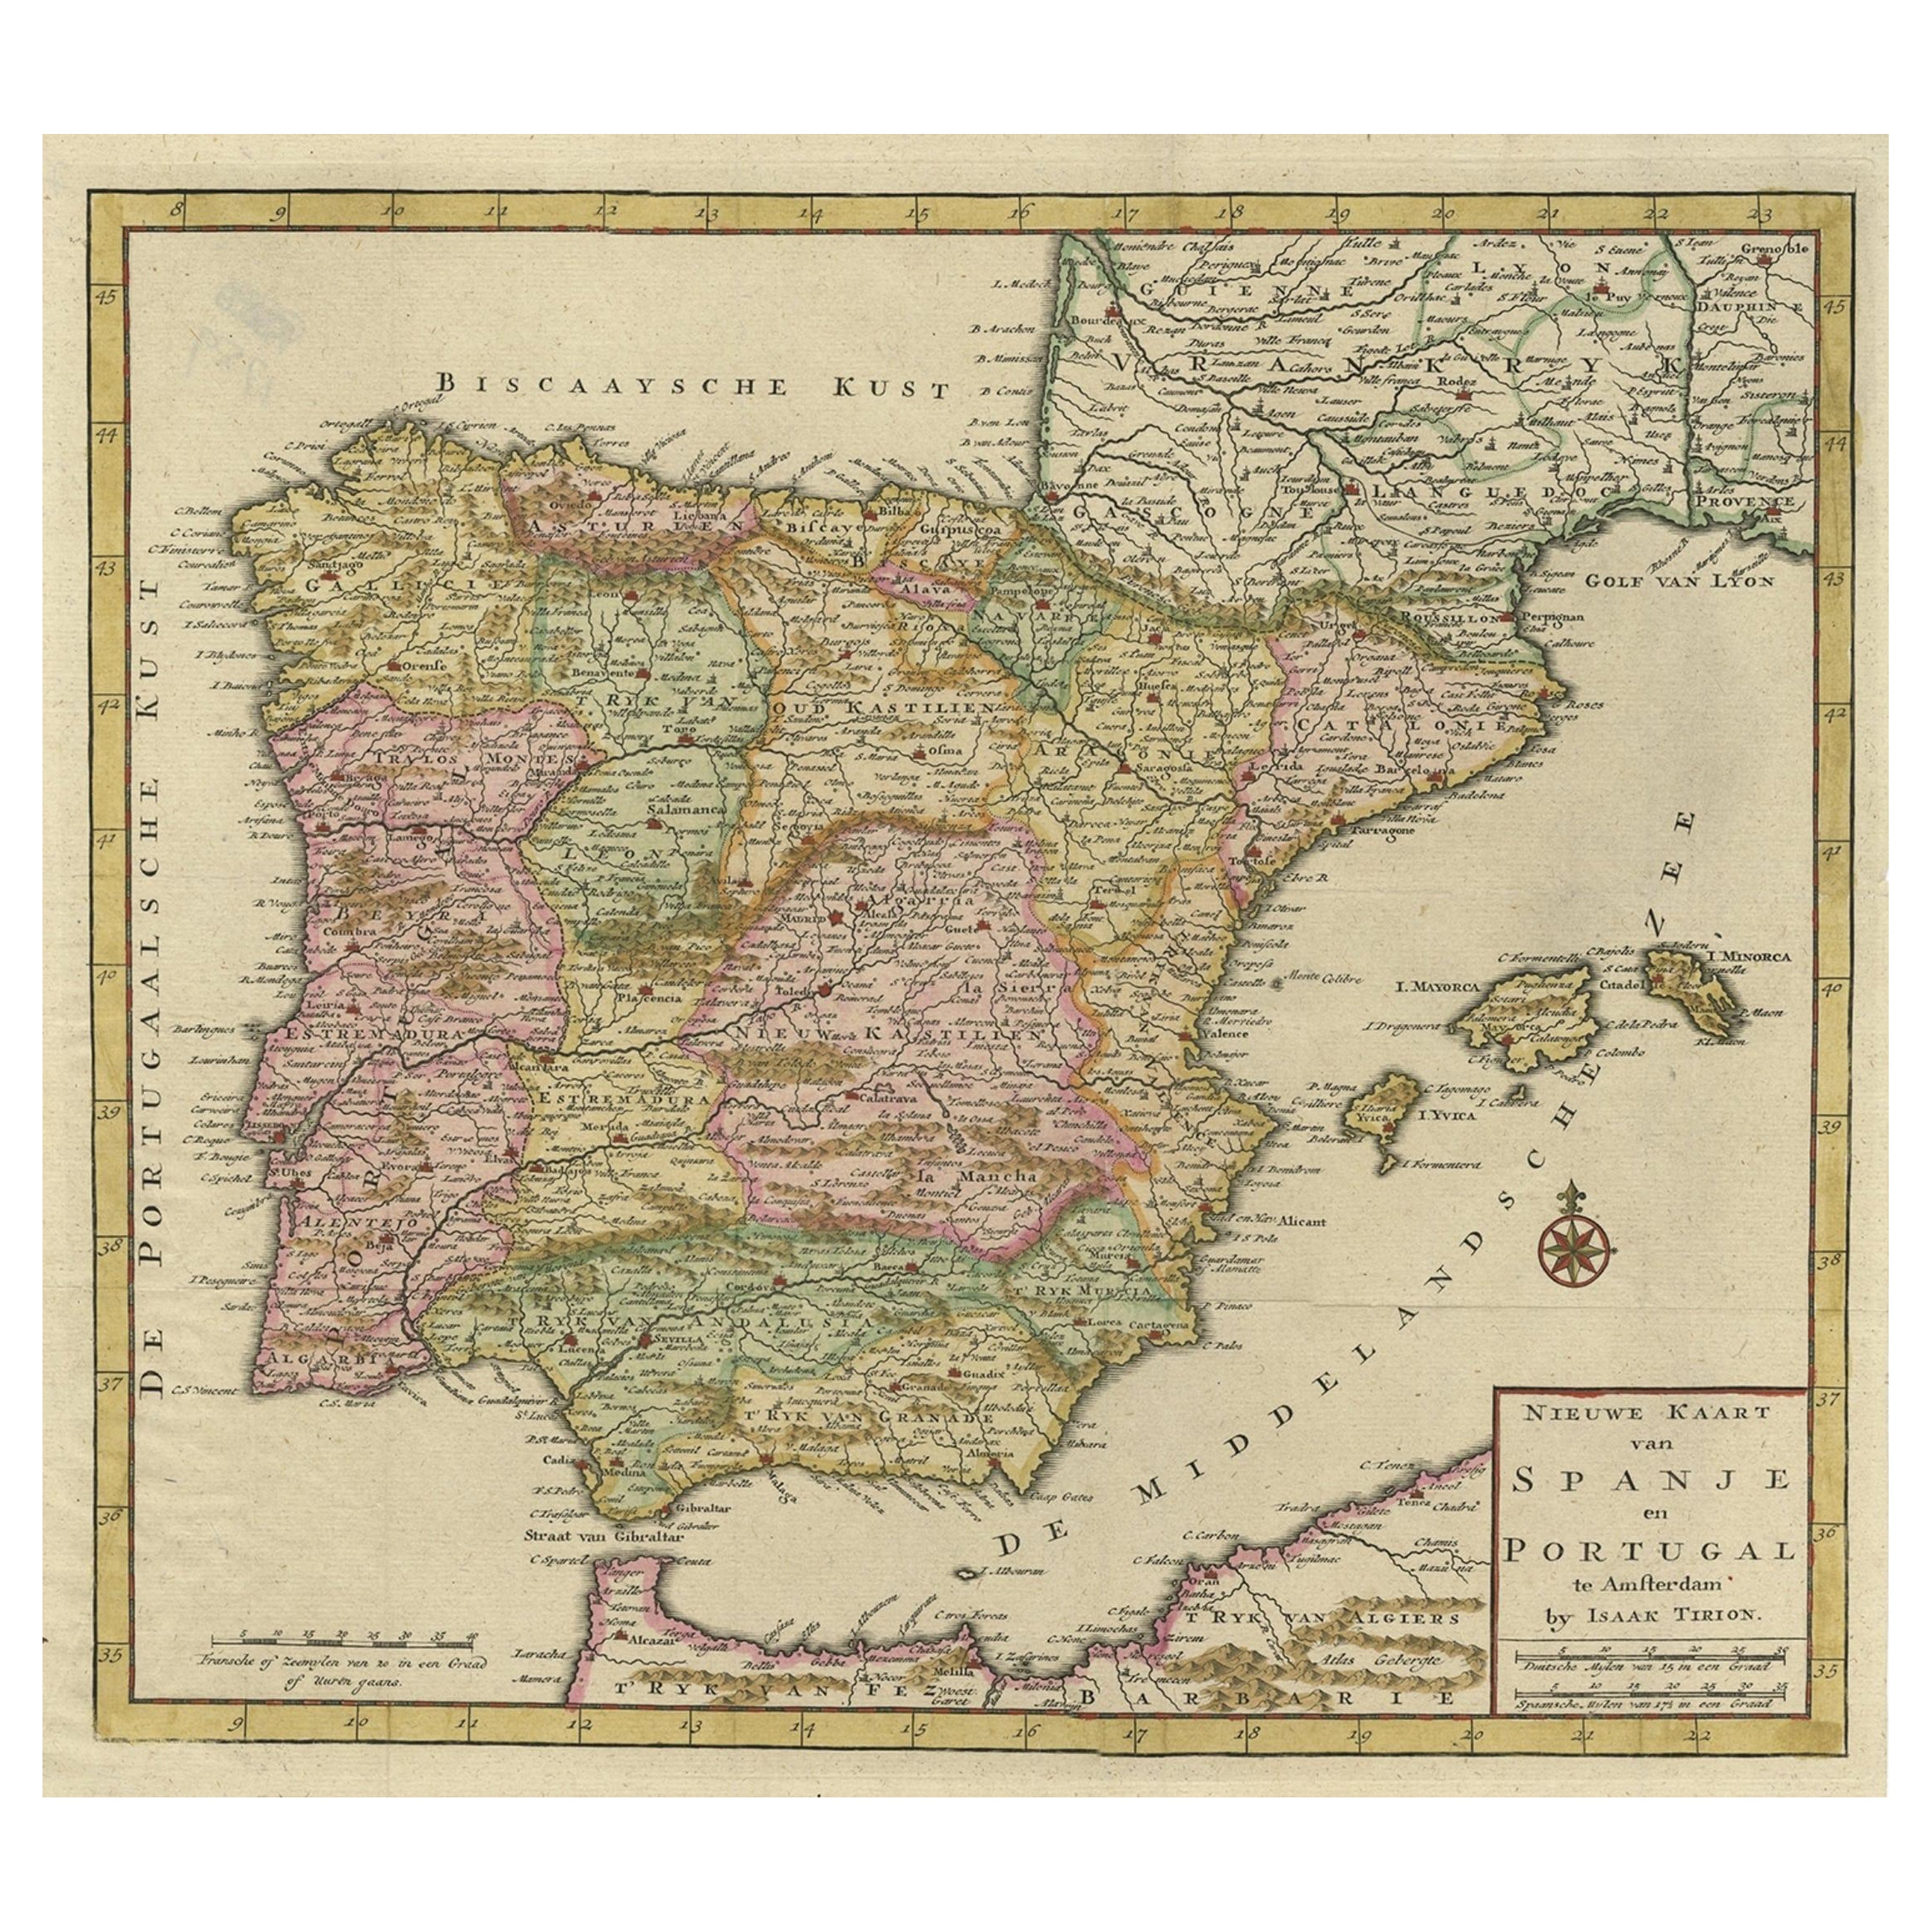 Attractive Engraved Old Map Showing Spain, Portugal Majorca, Ibiza etc. ca.1760